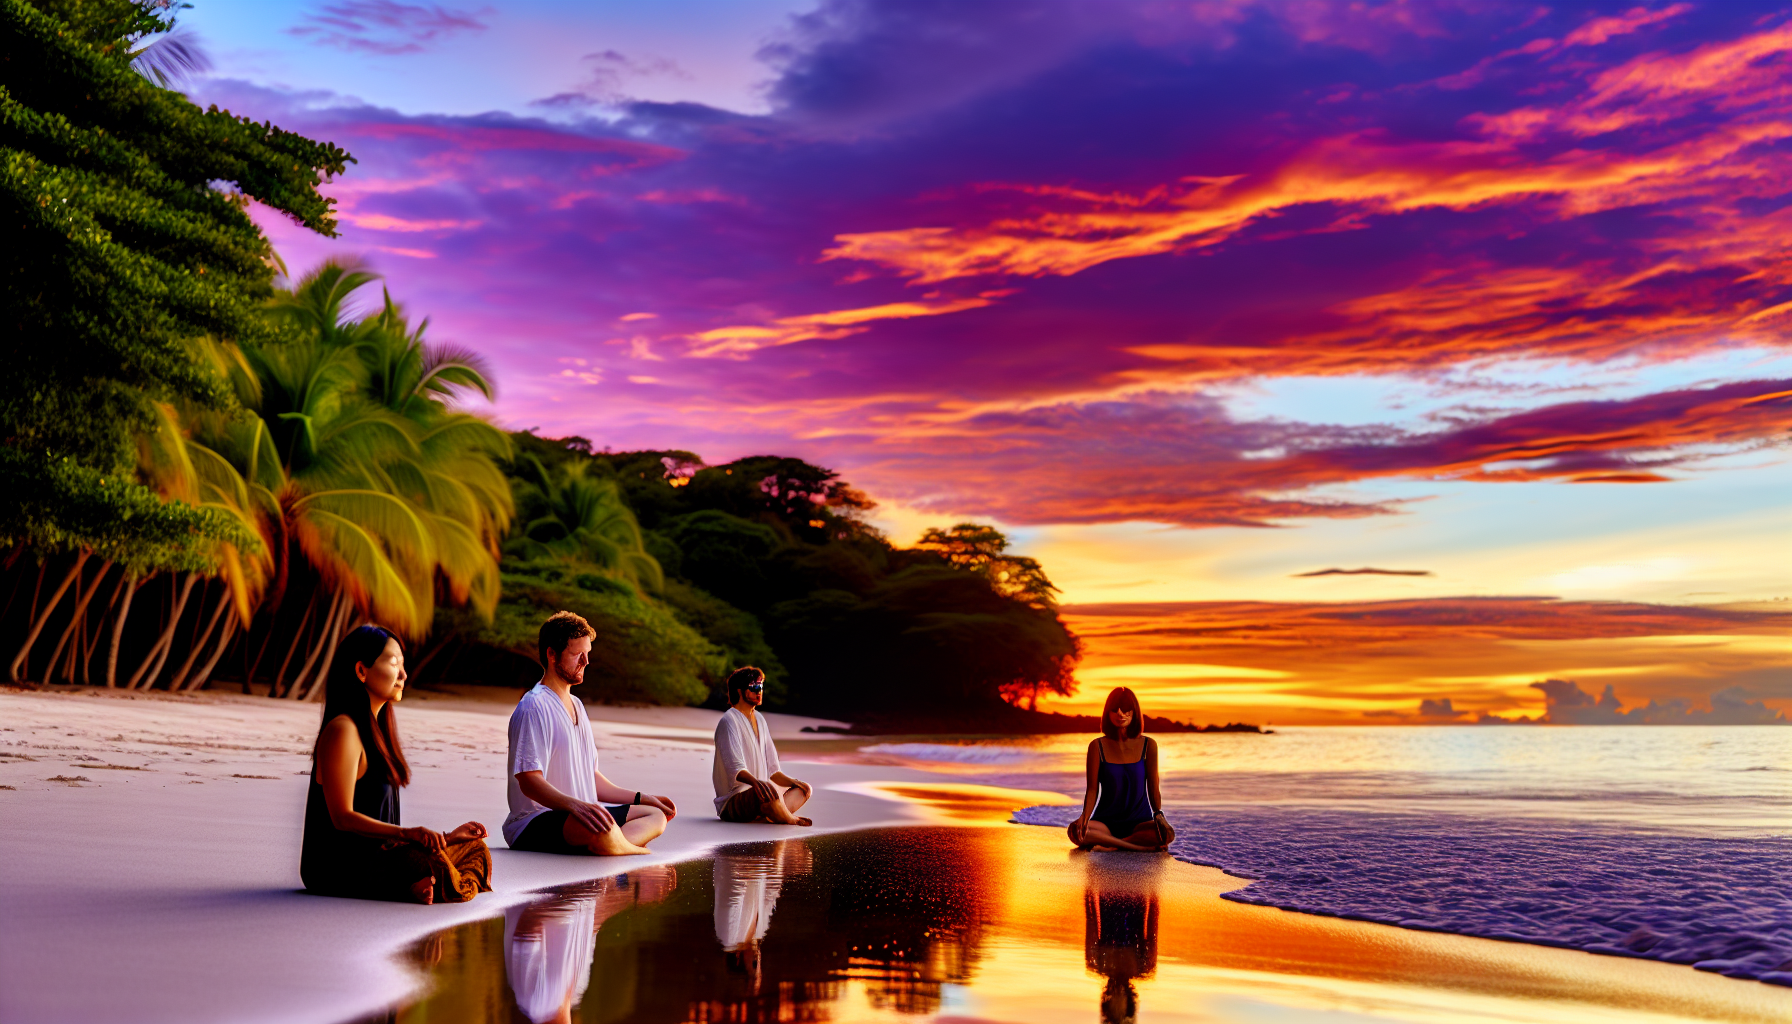 Visitors enjoying a serene sunset at Playa Minas, emphasizing the peaceful and relaxing atmosphere of the beach.